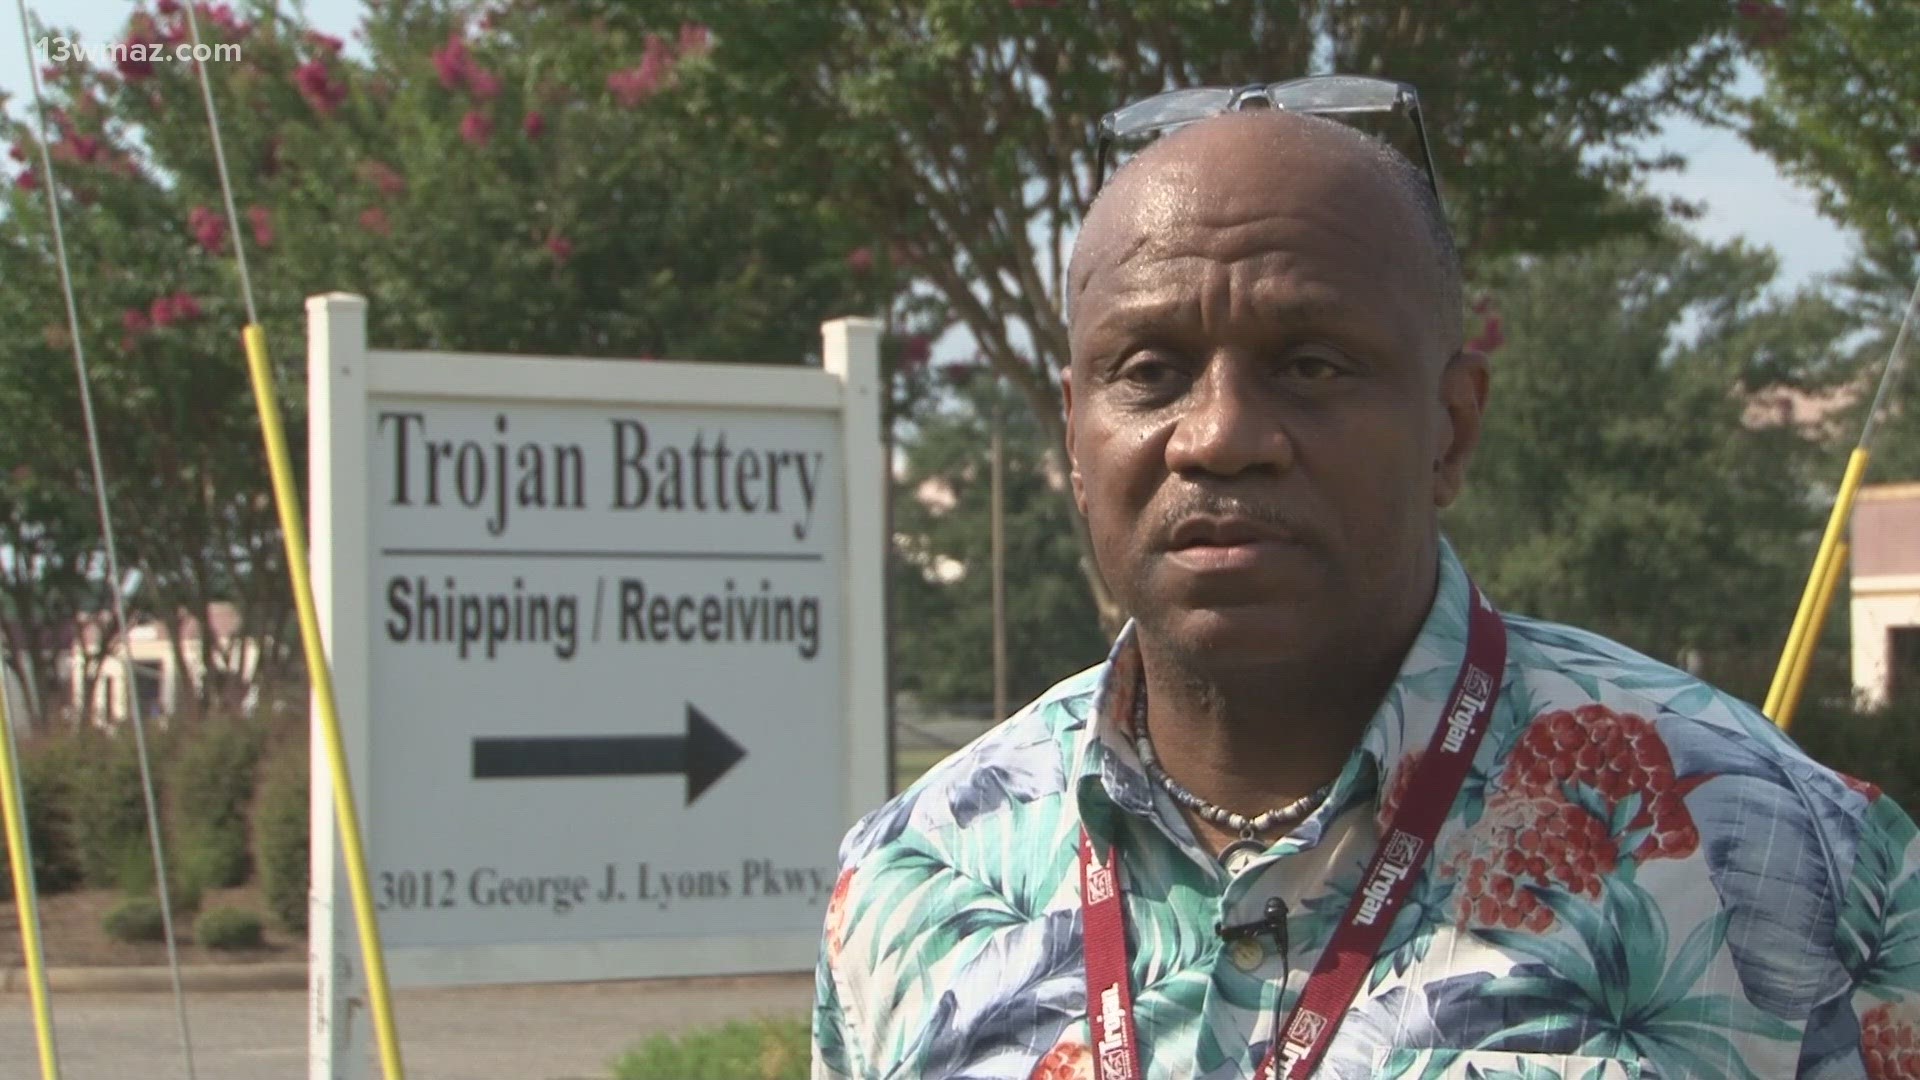 More than 100 people are out of a job in Sandersville. Trojan Battery announced the temporary job cuts this week.